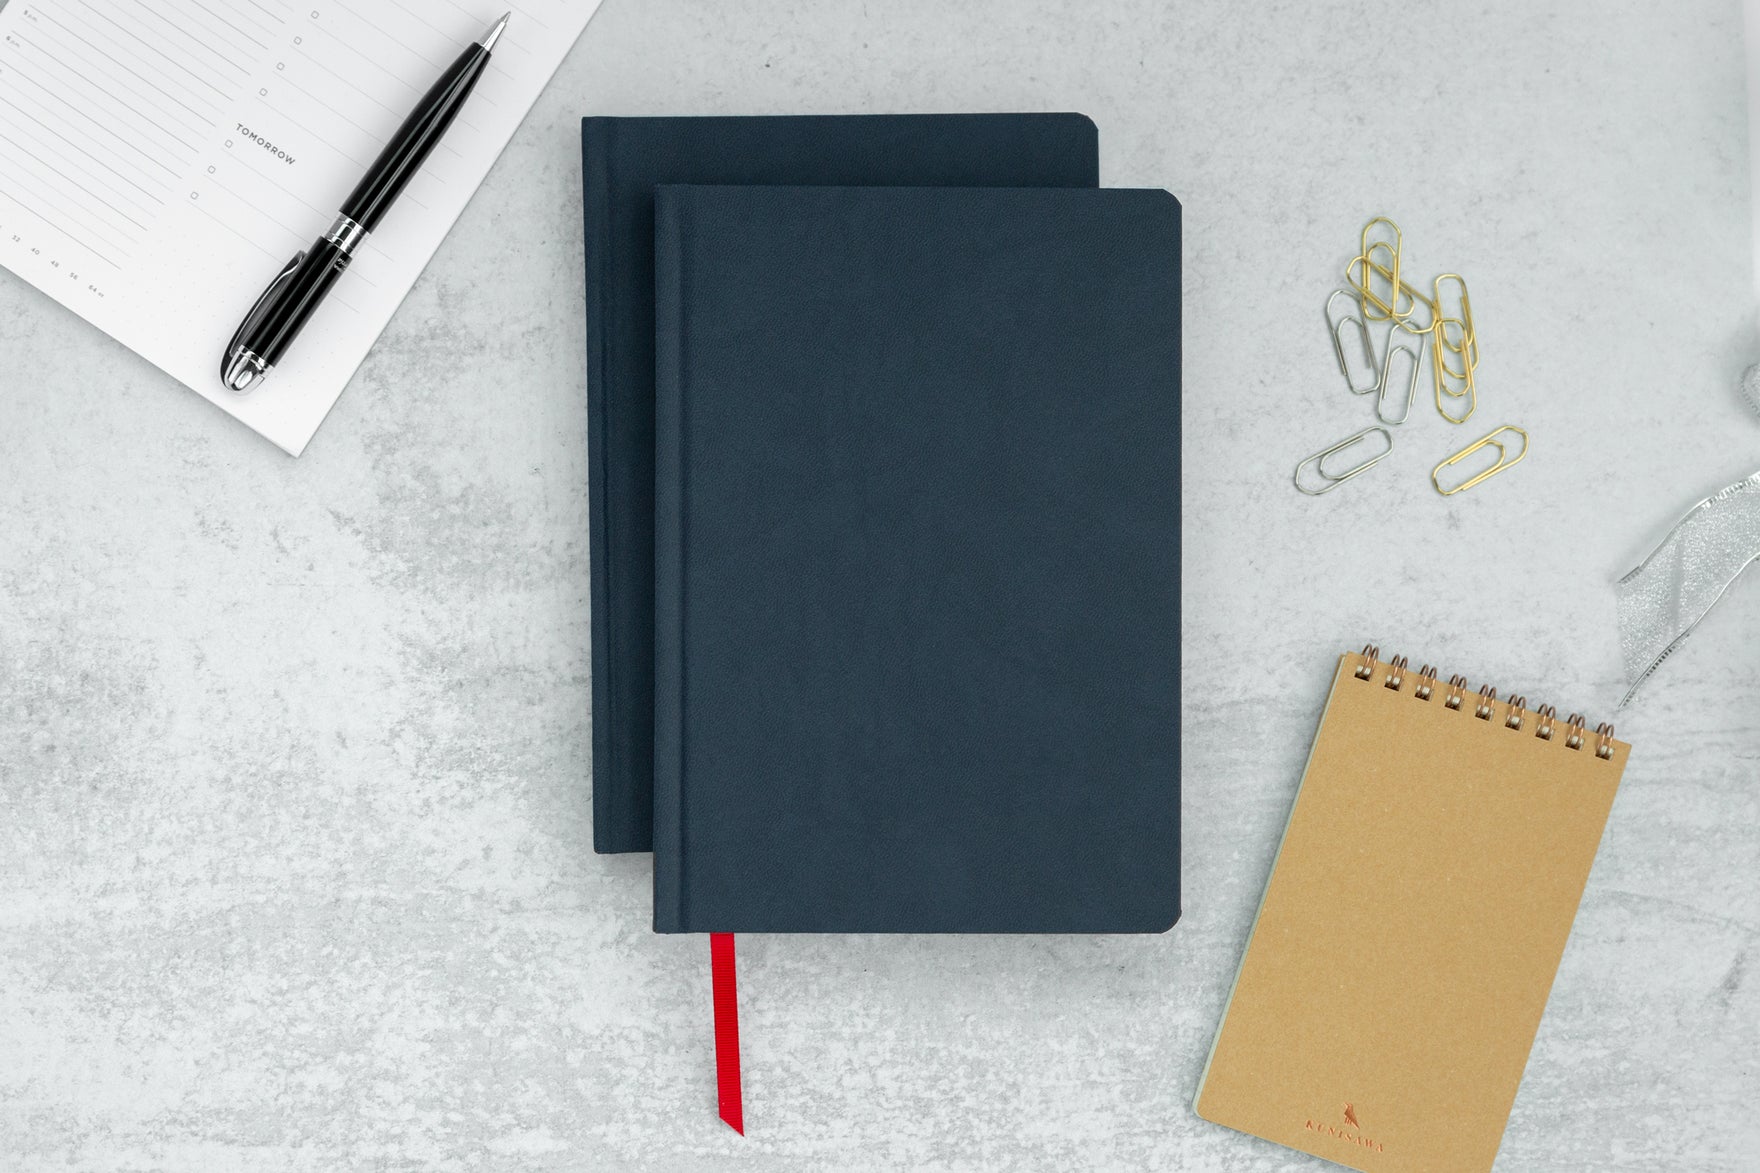 Two professional notebooks sit on a desk next to a jotter pad, a pen, and a pile of gold paperclips.